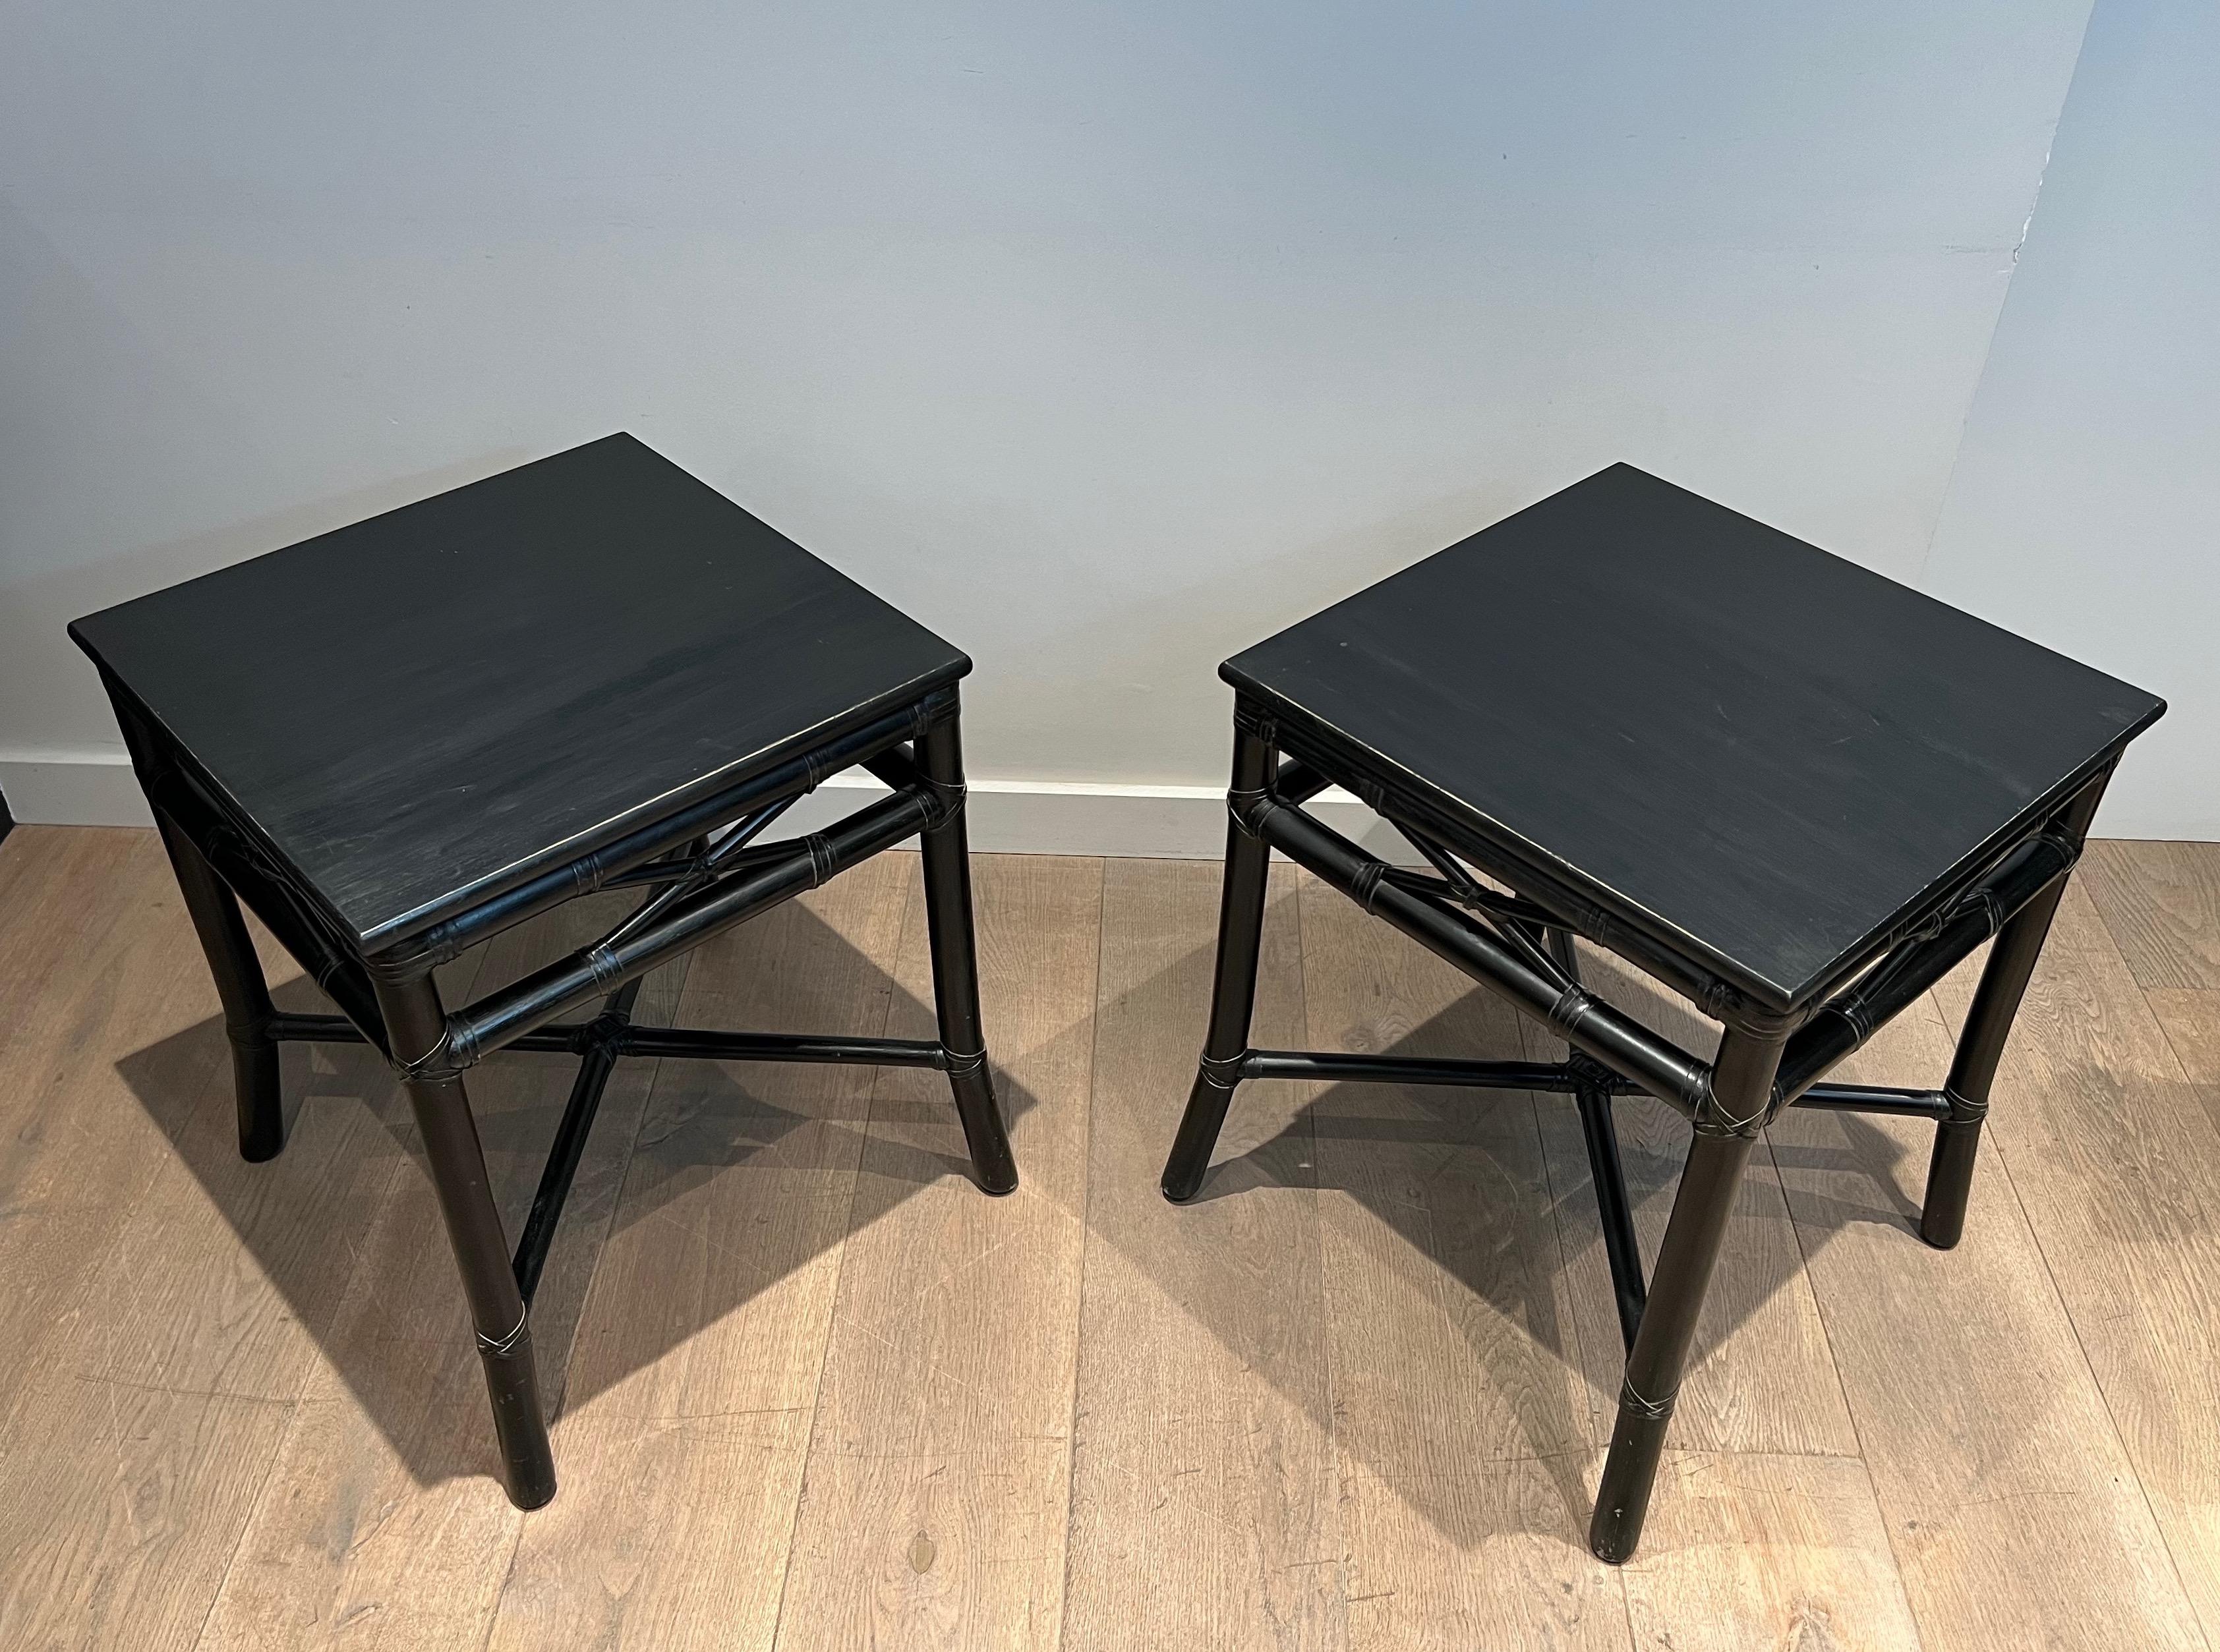 Pair of Black Lacquered Faux-Bamboo Side Tables by Gasparucci For Sale 7